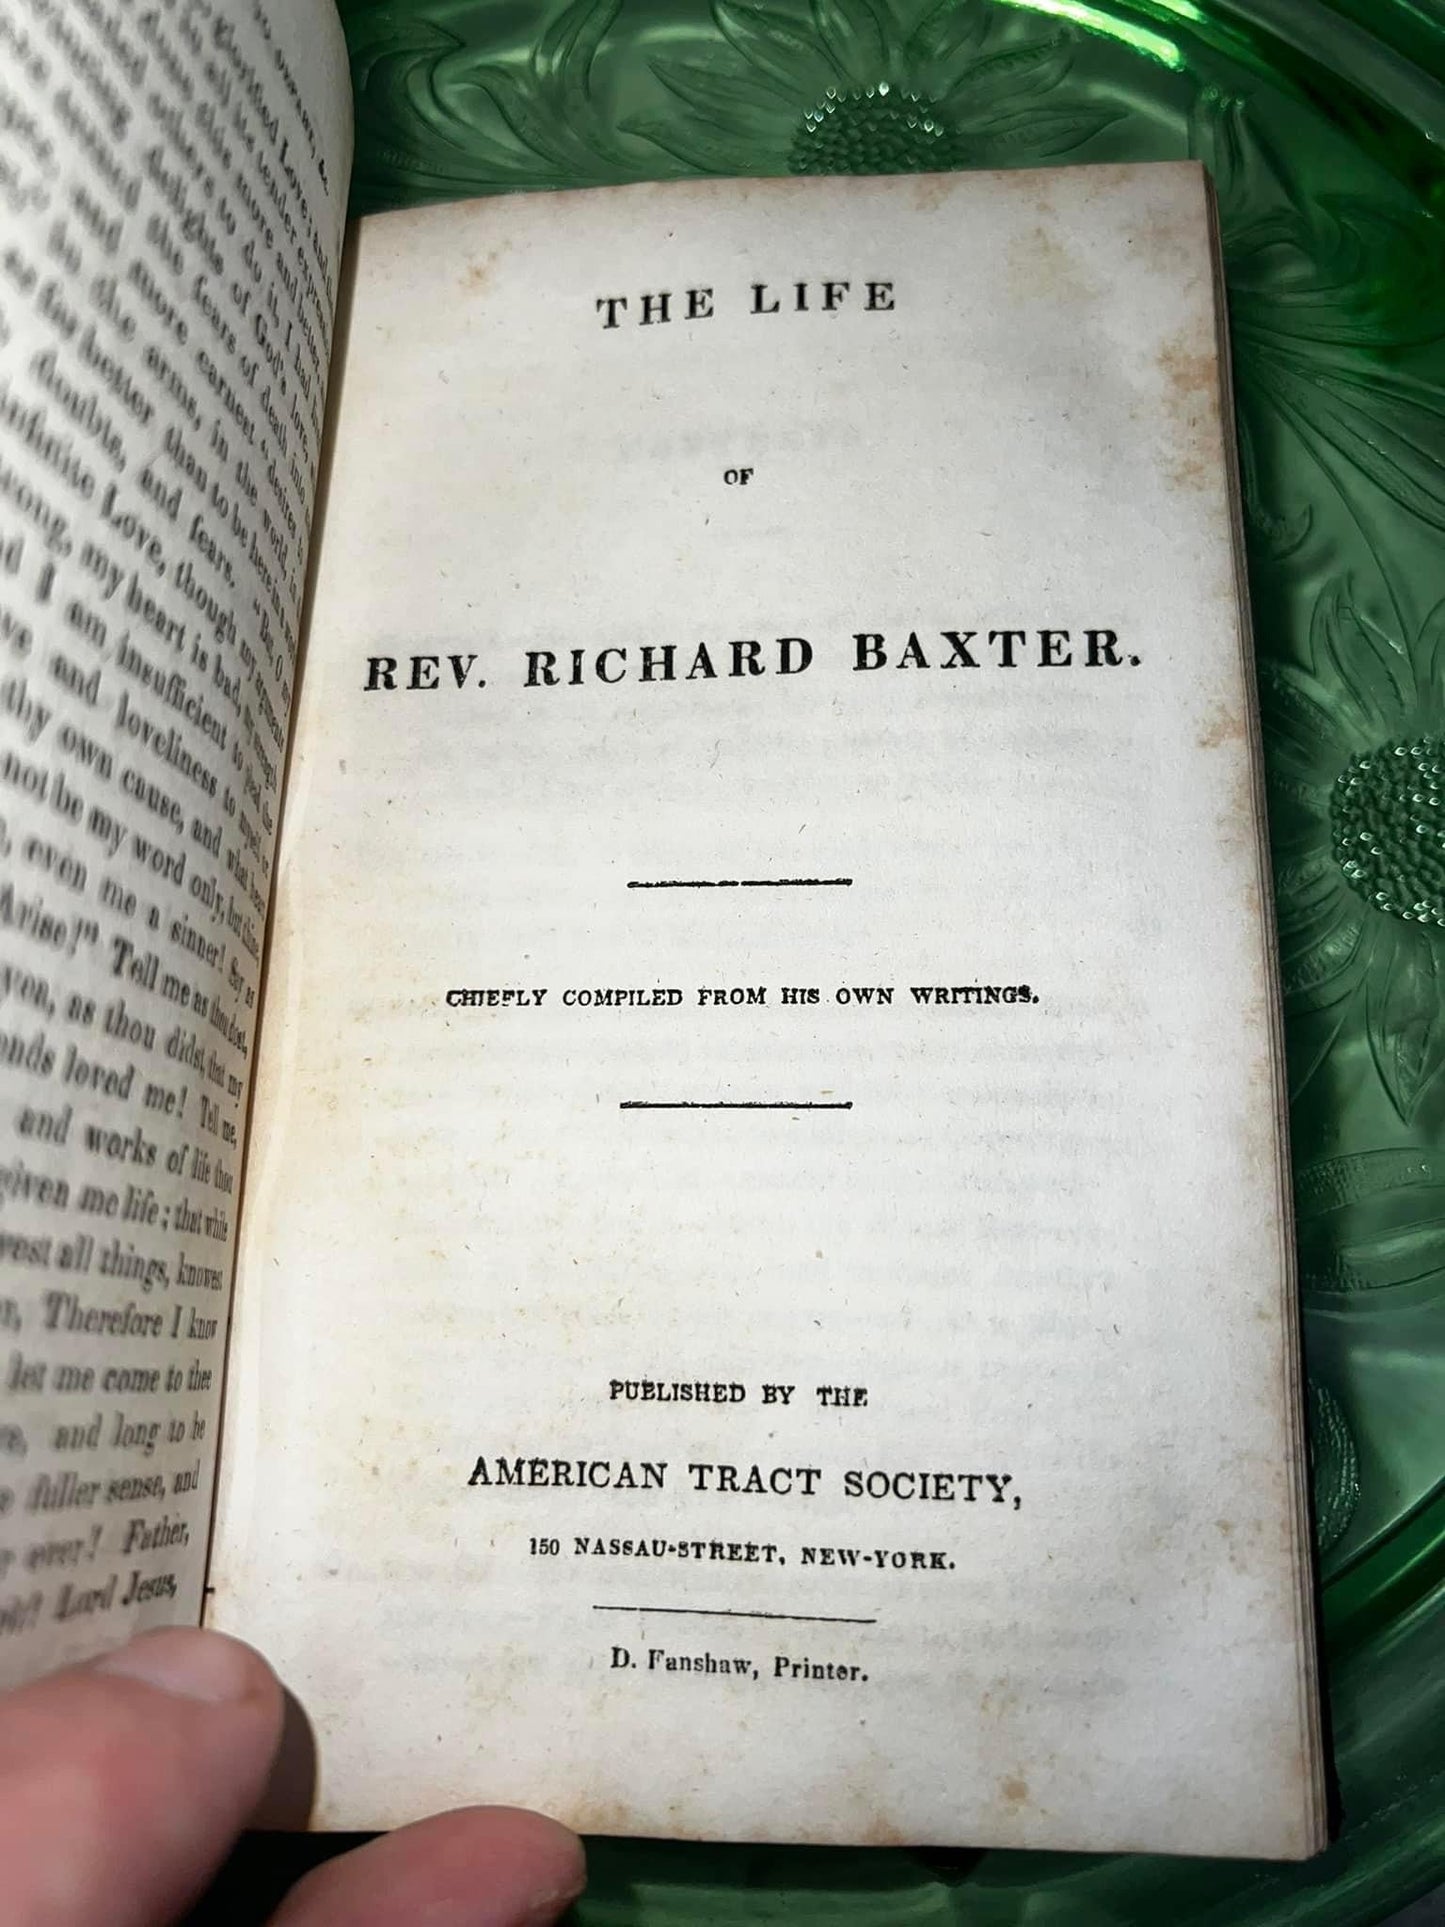 Antique 1850-1860 American tract society Evangelical library Call to the unconverted , dying thoughts , life of reverend Richard Baxter